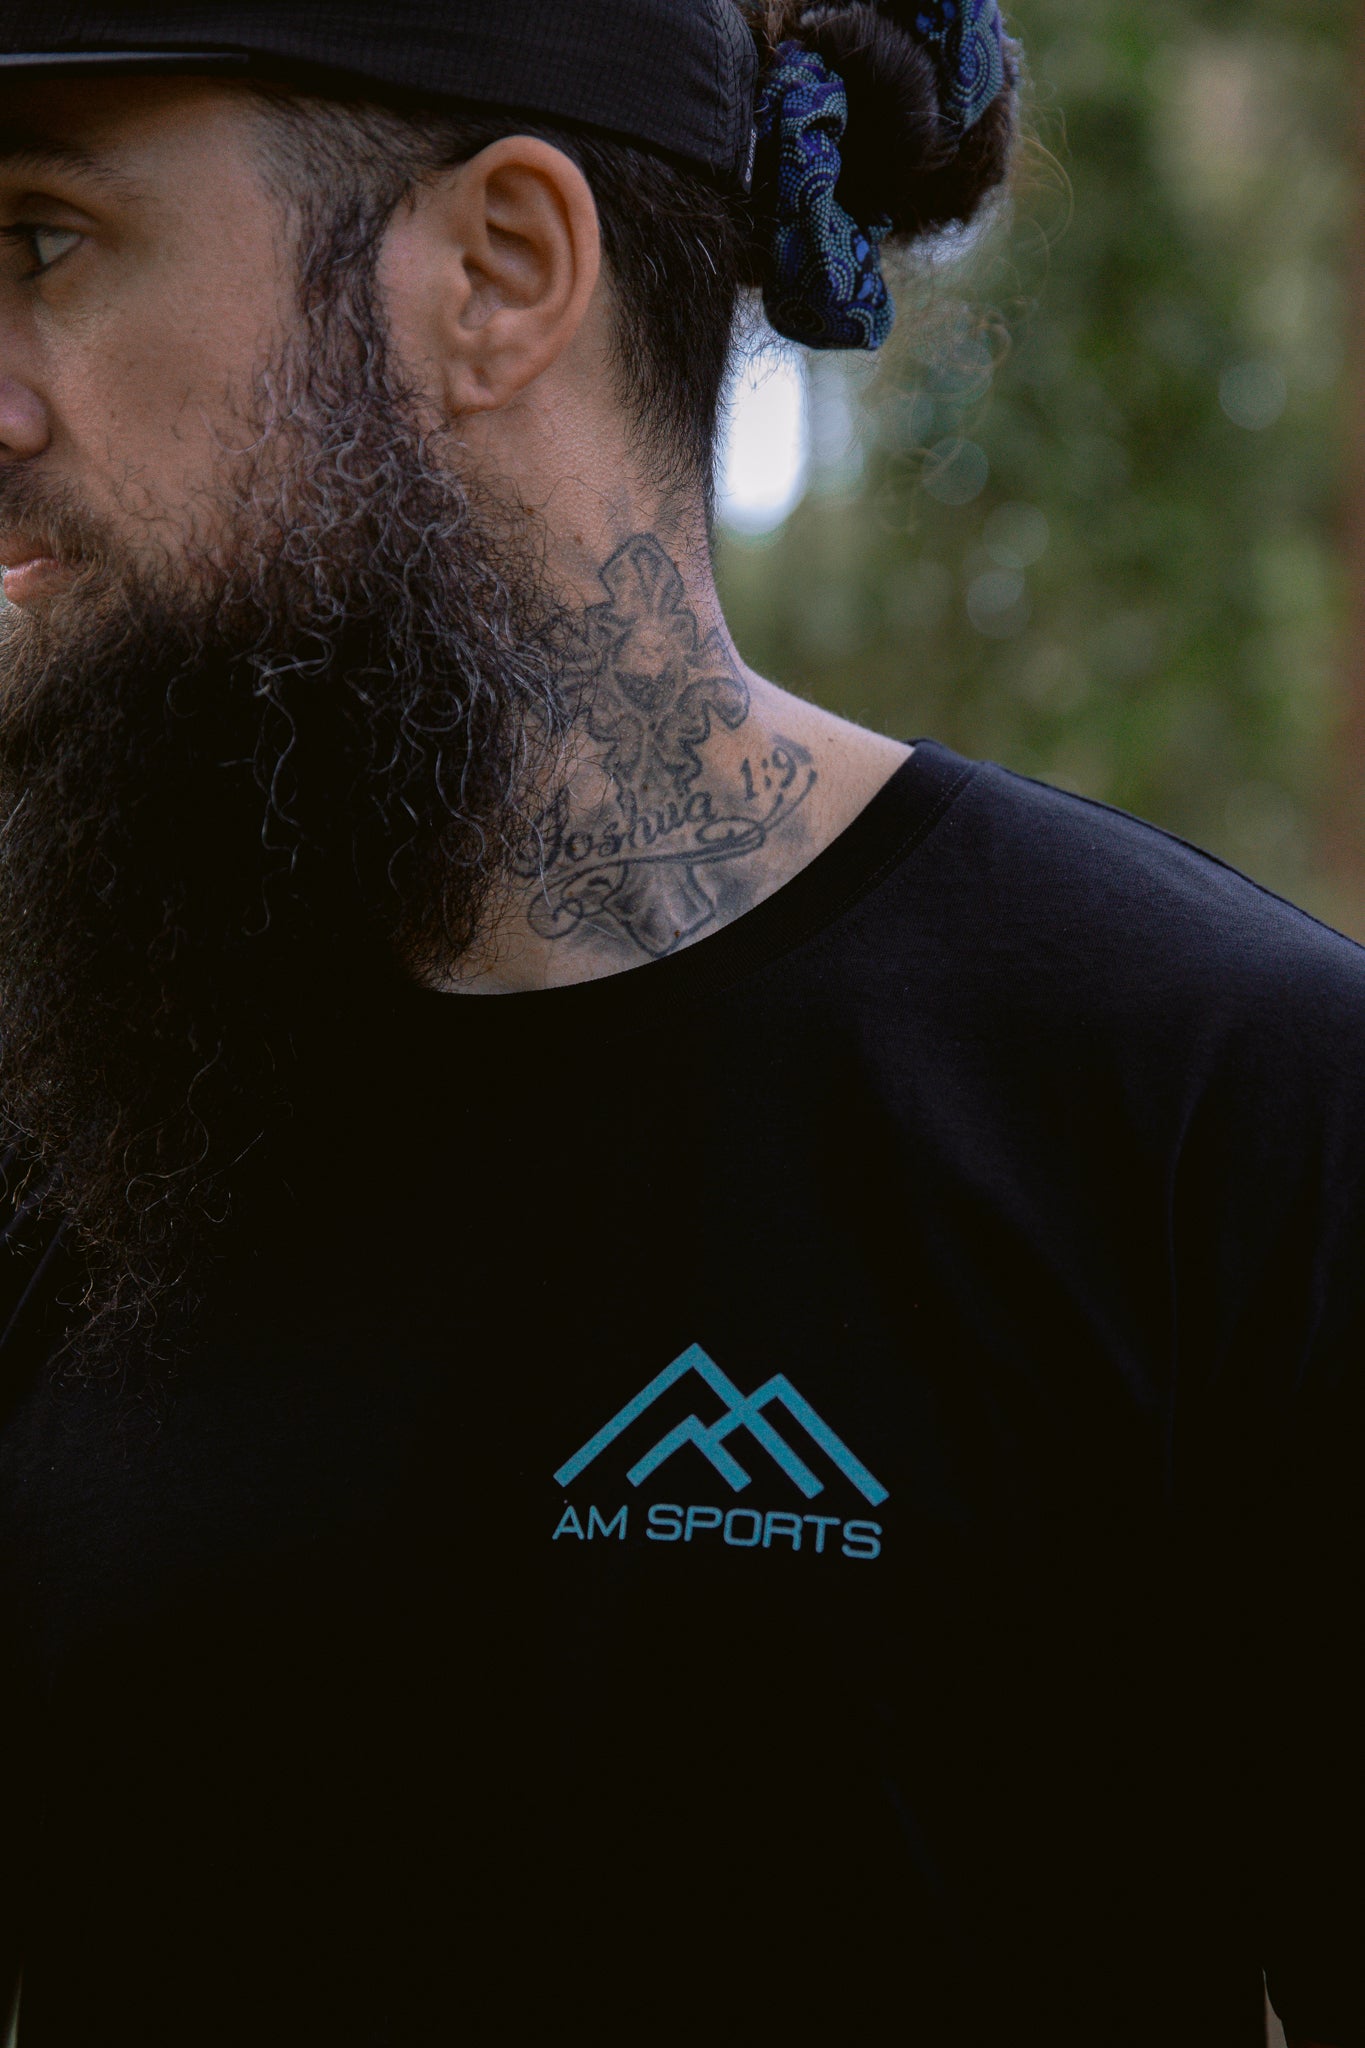 AM Sports T-Shirt - Why We Ride